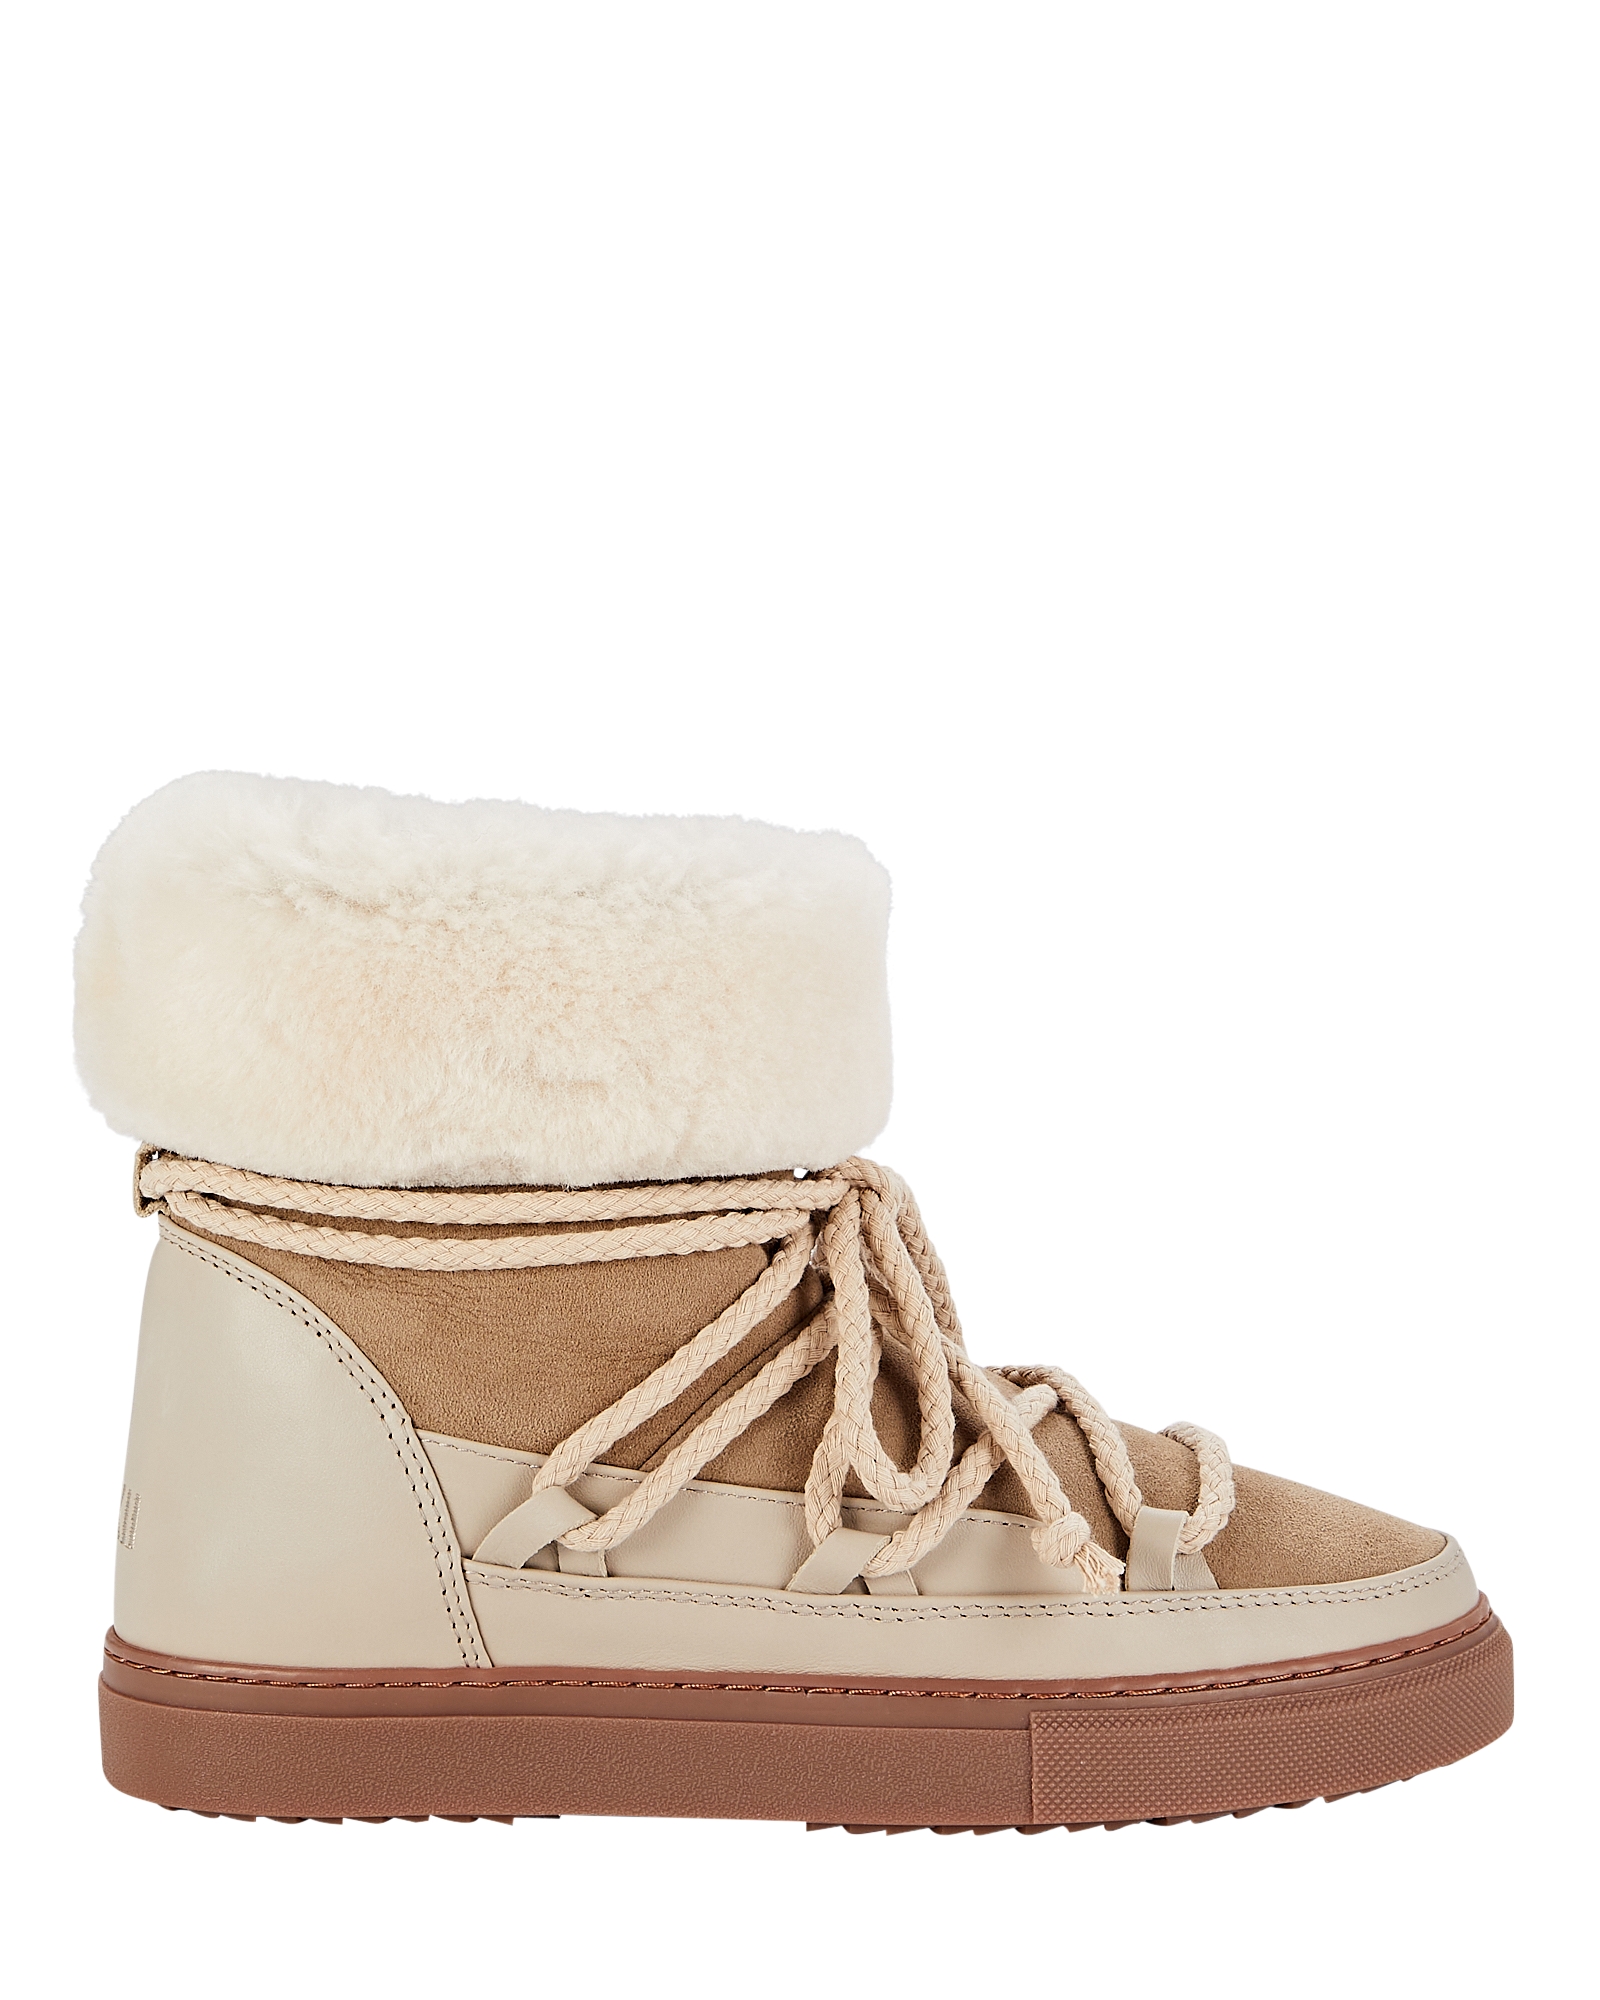 Inuikii Classic Shearling-Trimmed Ankle Boots in Taupe | INTERMIX®